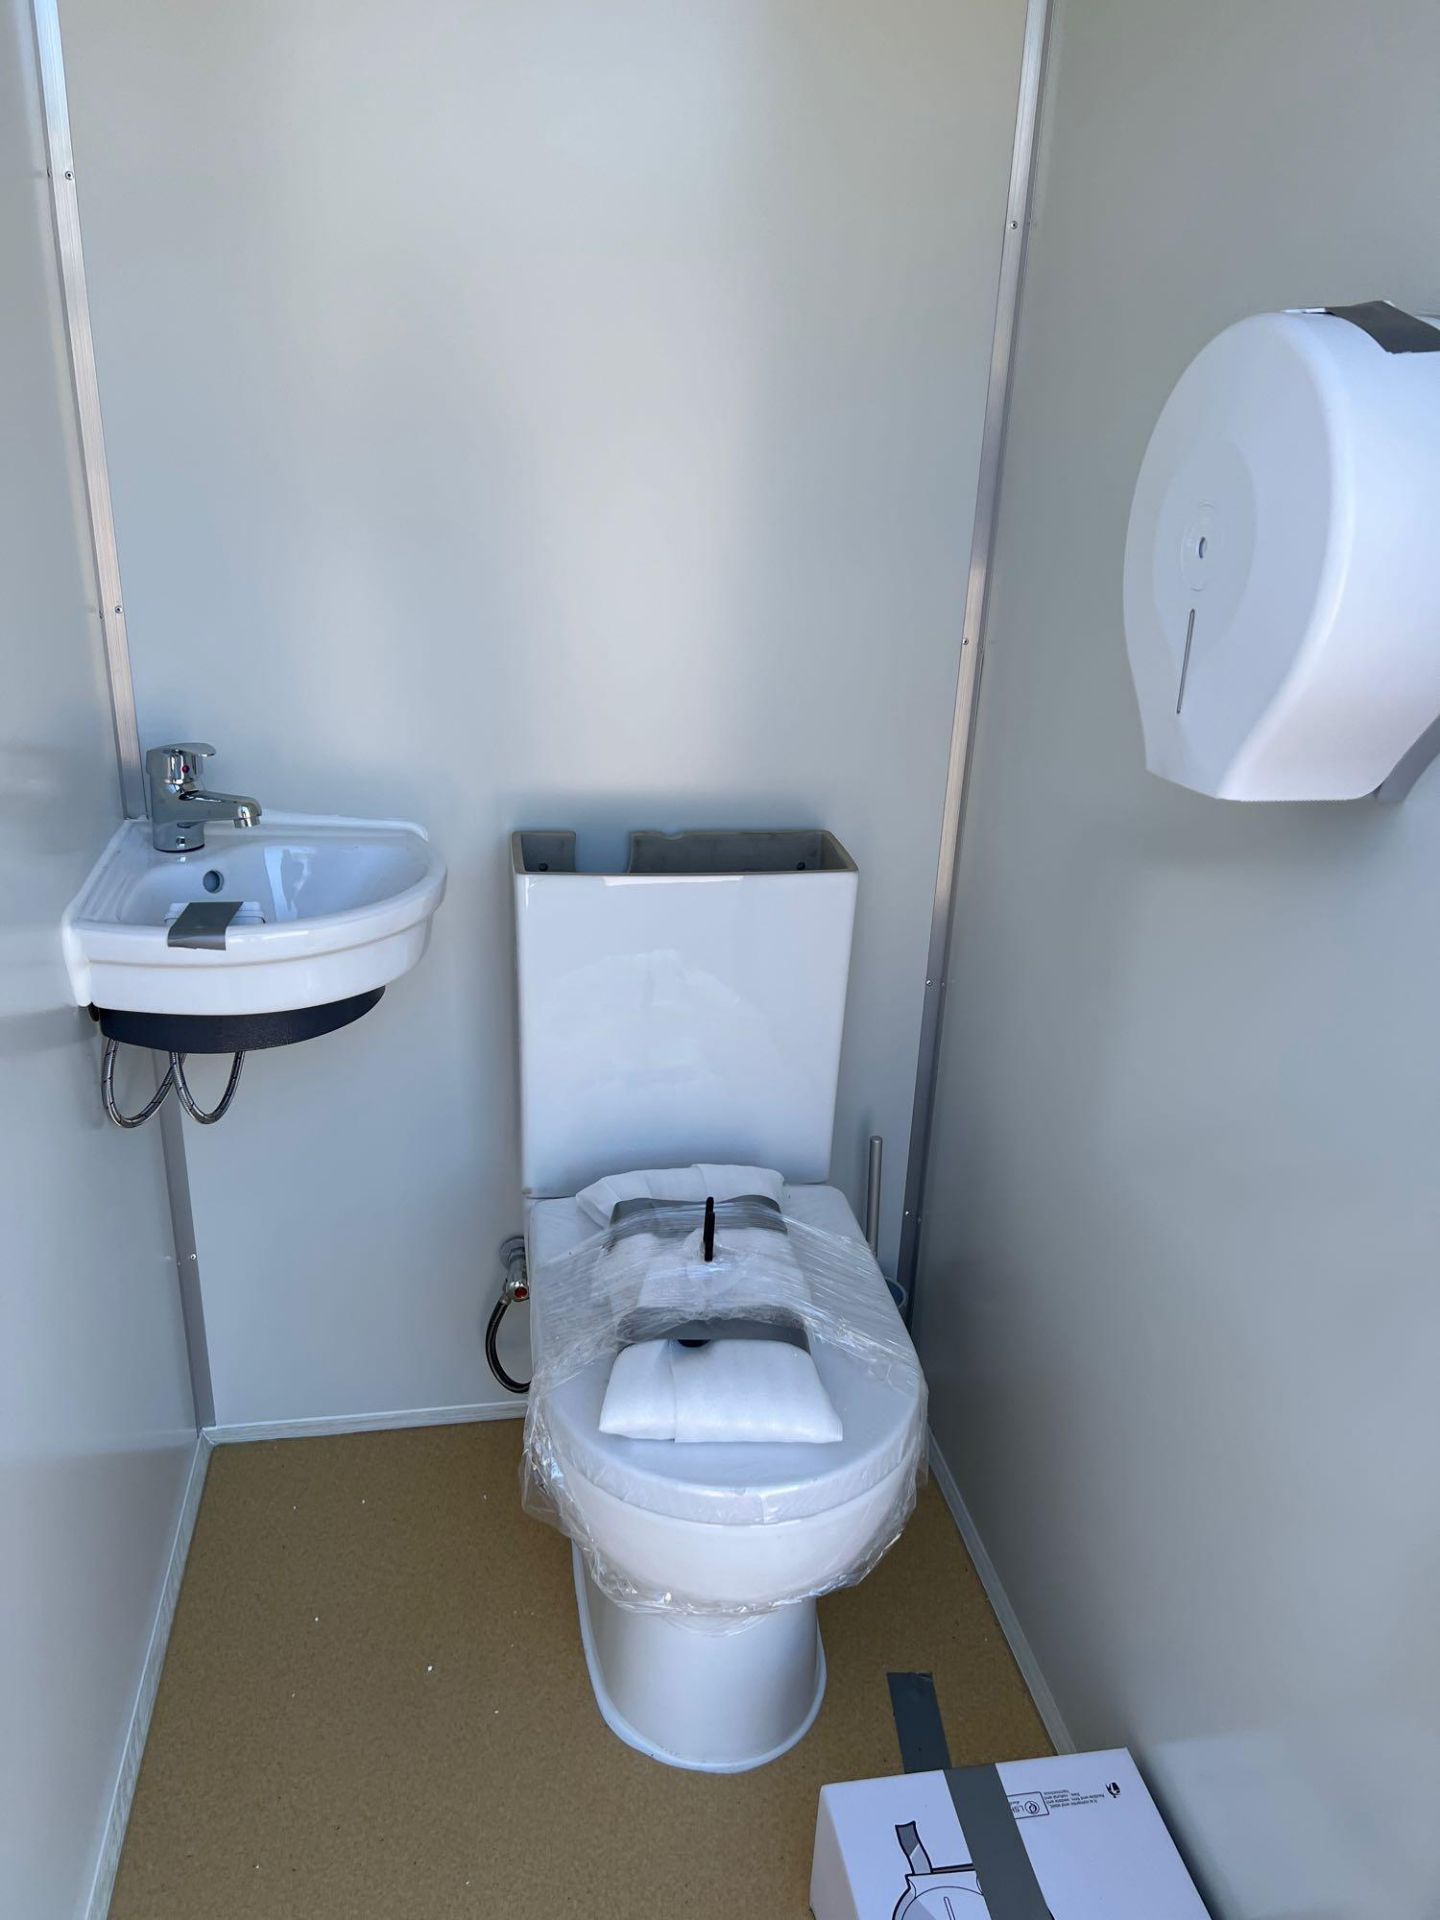 UNUSED PORTABLE DOUBLE BATHROOM UNIT, 2 STALLS, ELECTRIC & PLUMBING HOOK UP WITH EXTERIOR PLUMBING C - Image 11 of 13